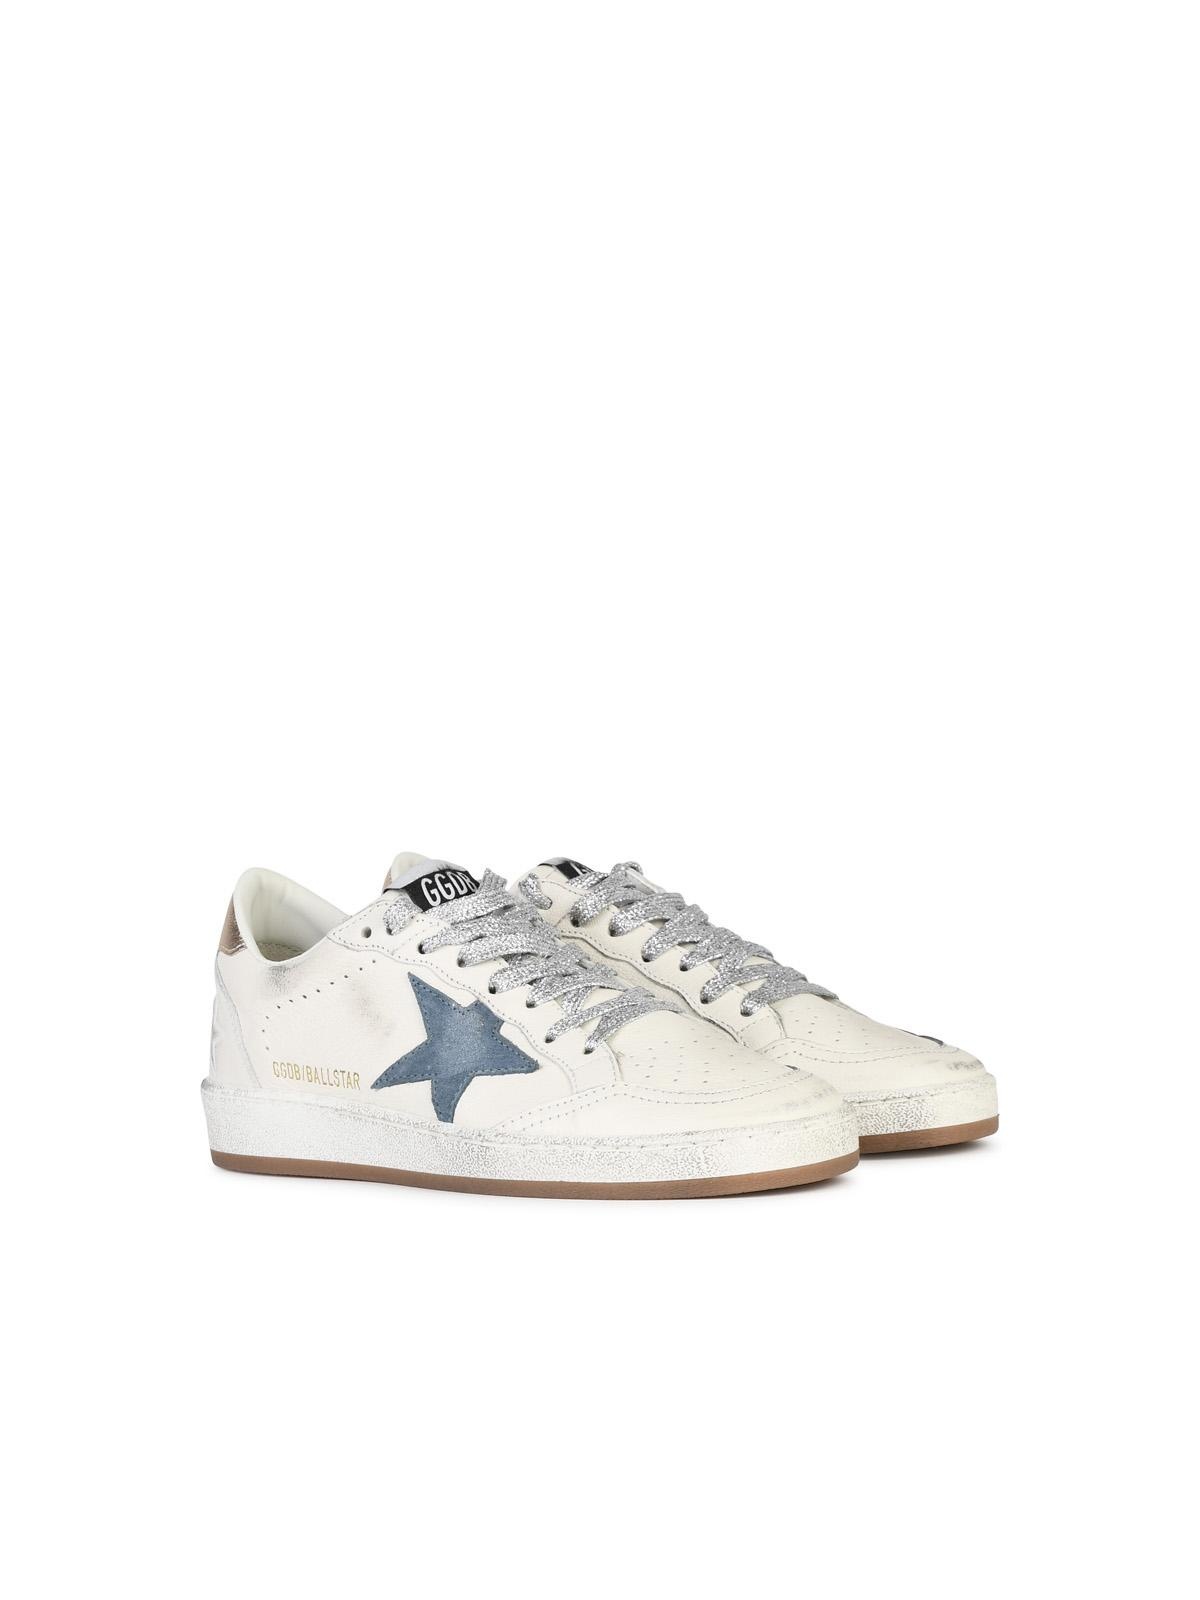 Golden Goose 'Ball Star' White Leather Sneakers Woman - 2